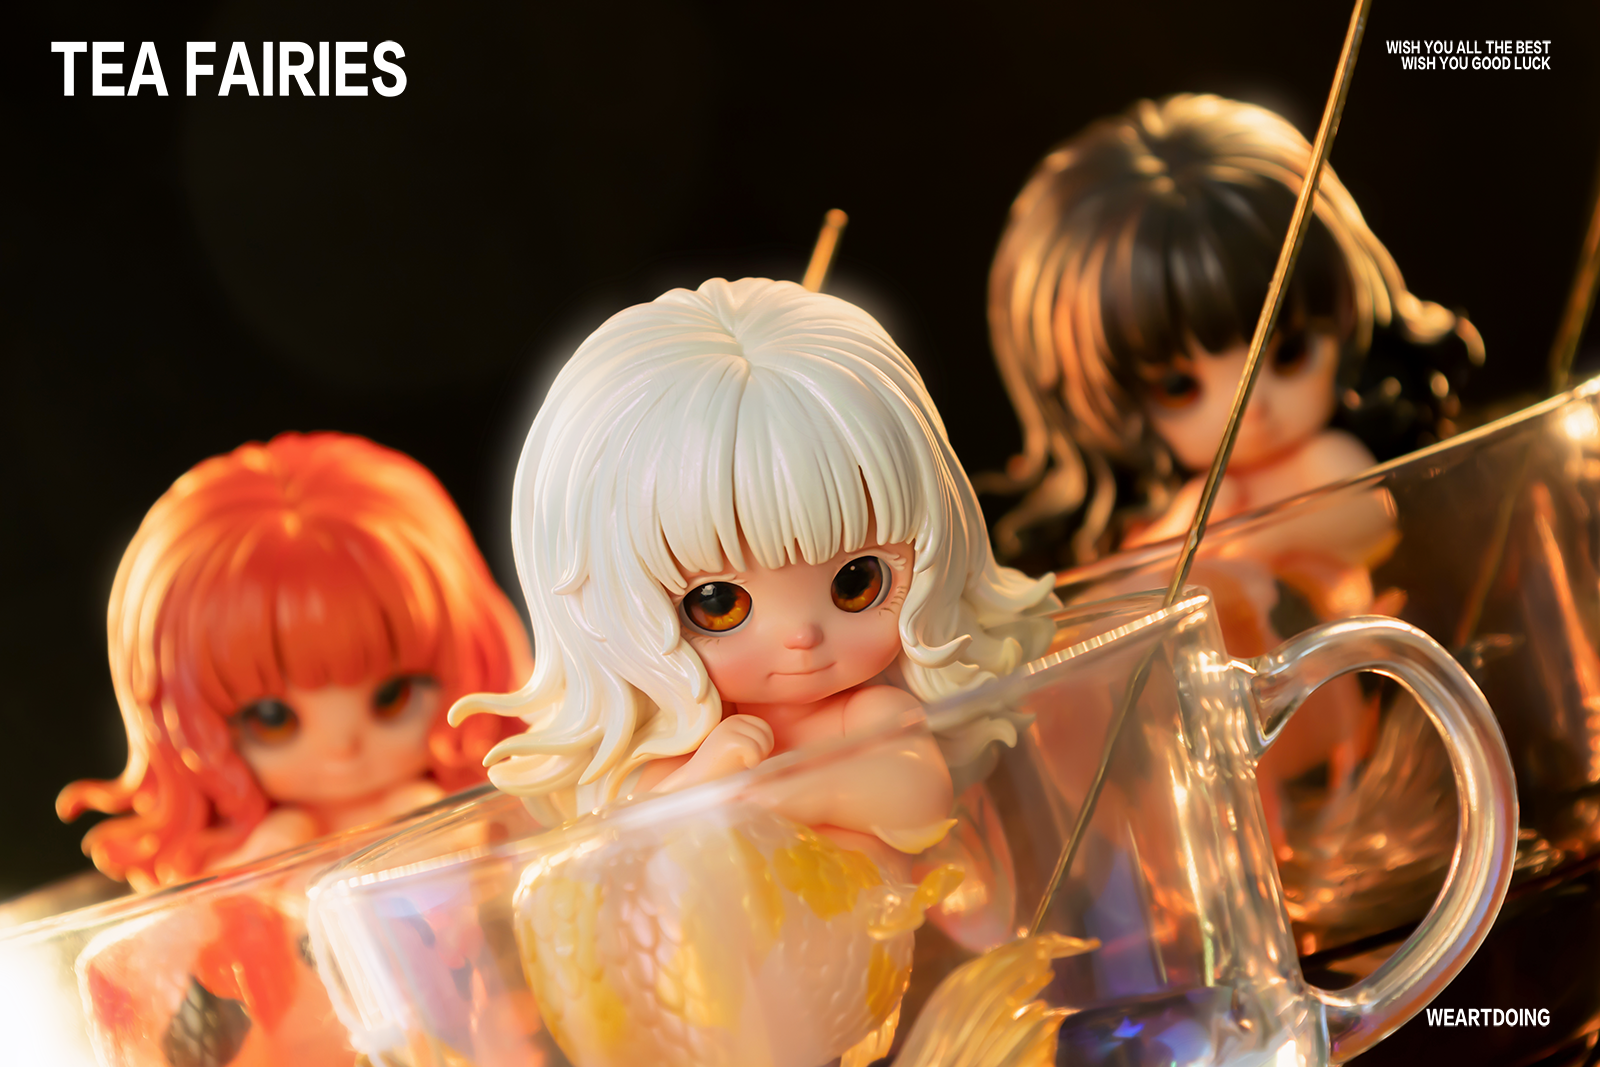 Tea Fairies - Preorder: Dolls in a glass cup, close-ups of dolls, toy, cartoon face, sign, and eyes.